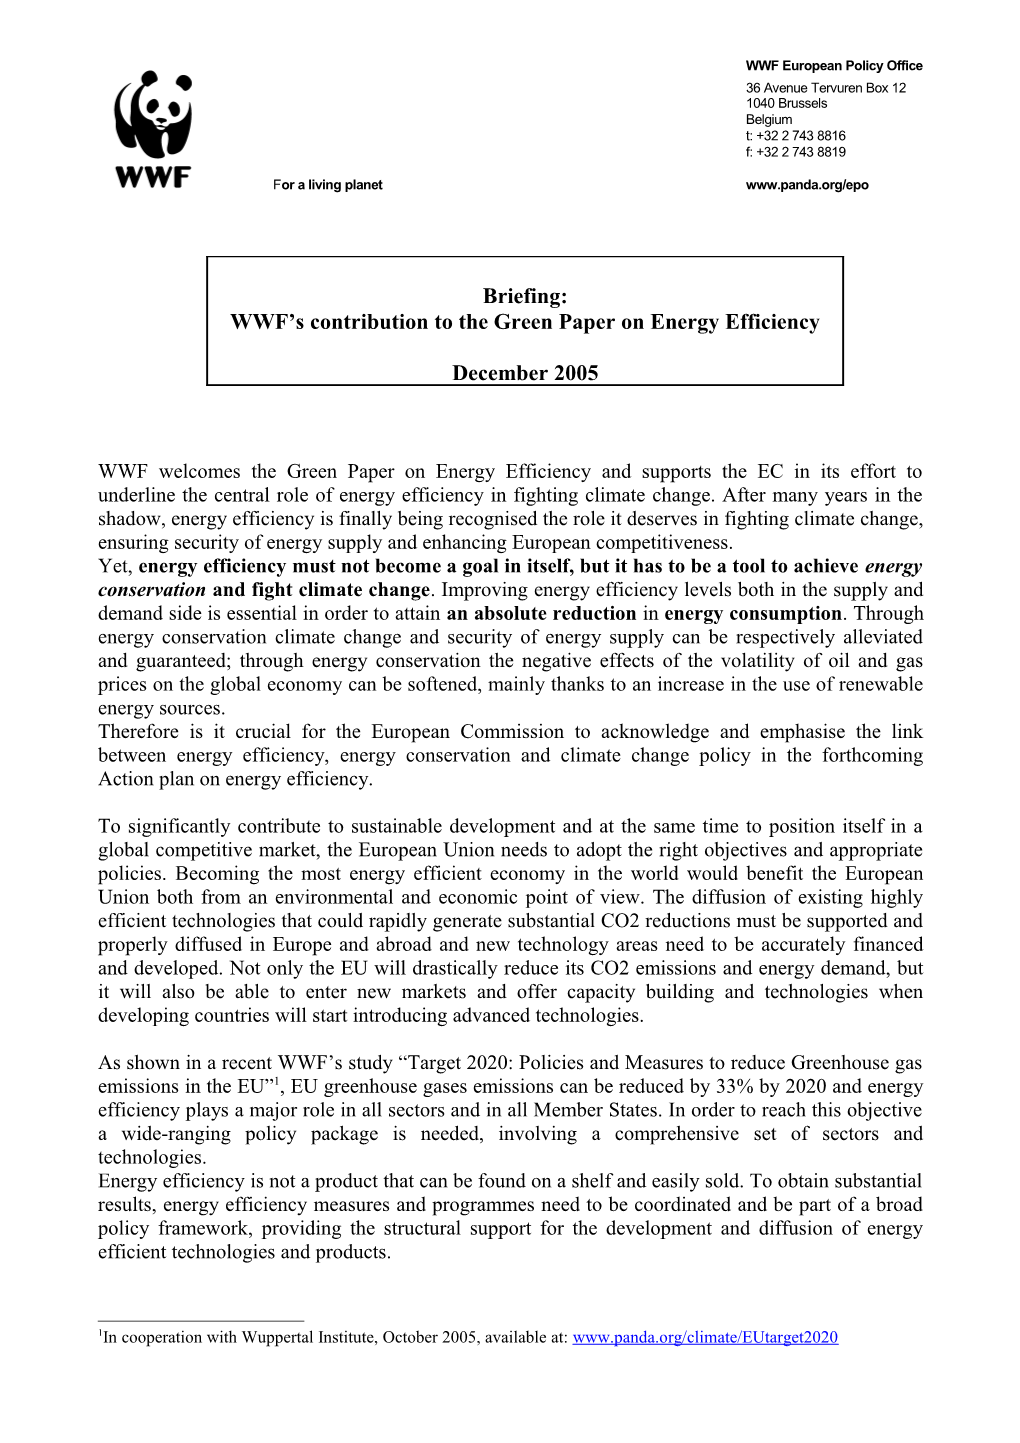 WWF Welcomes the Green Paper on Energy Efficiency and Supports the EC in Its Effort To